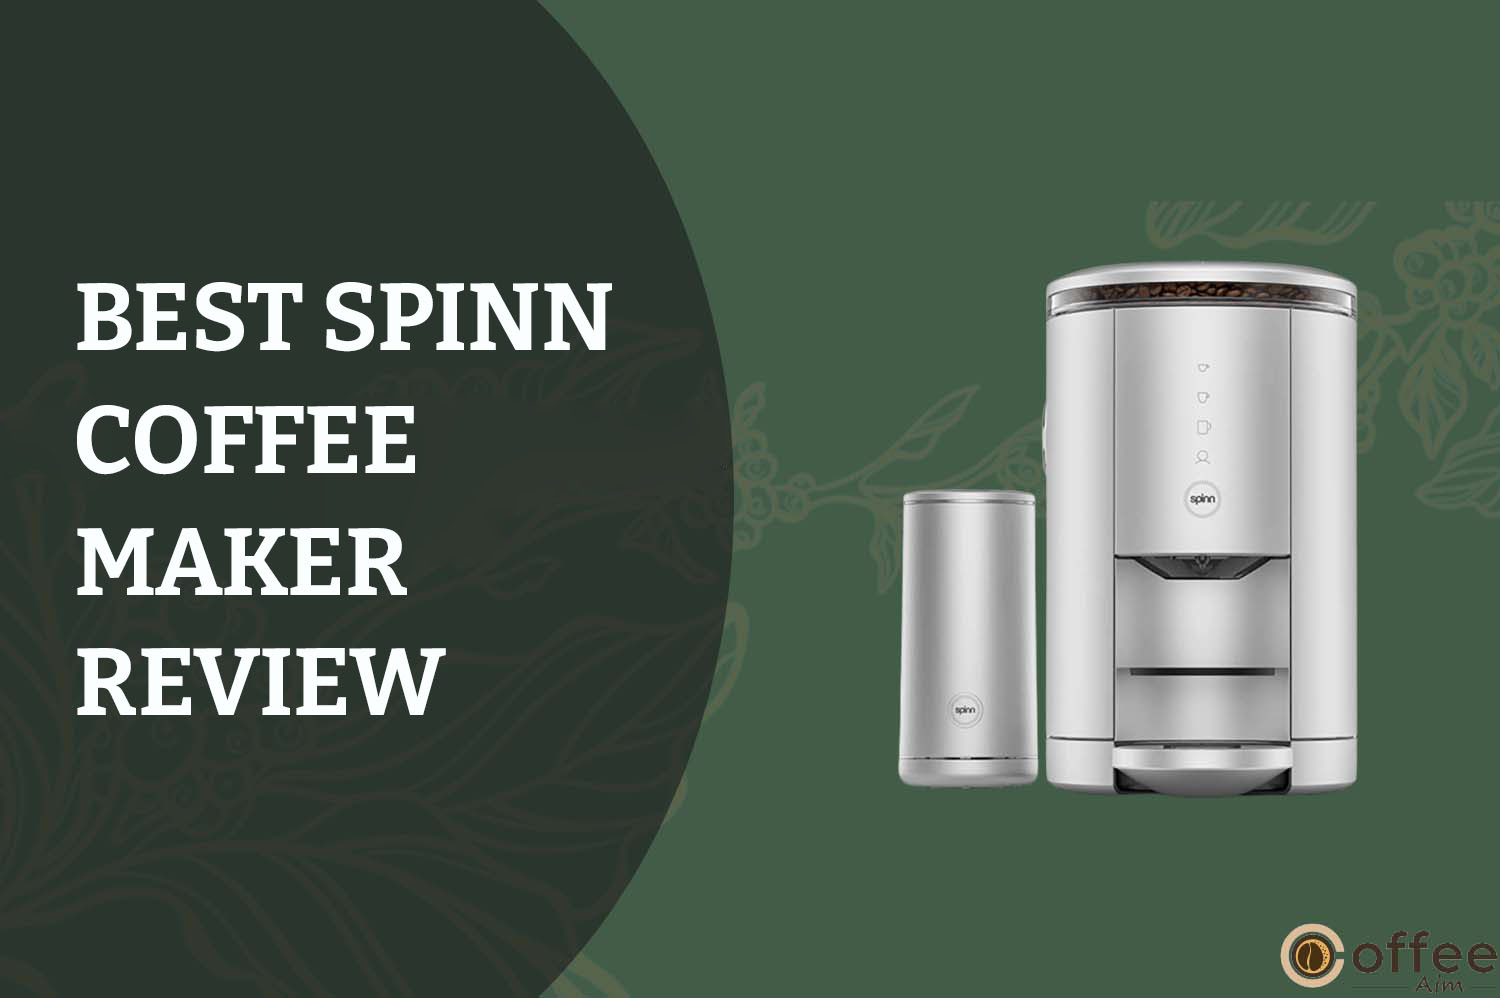 Feature image for the article "Best spin coffee maker review"